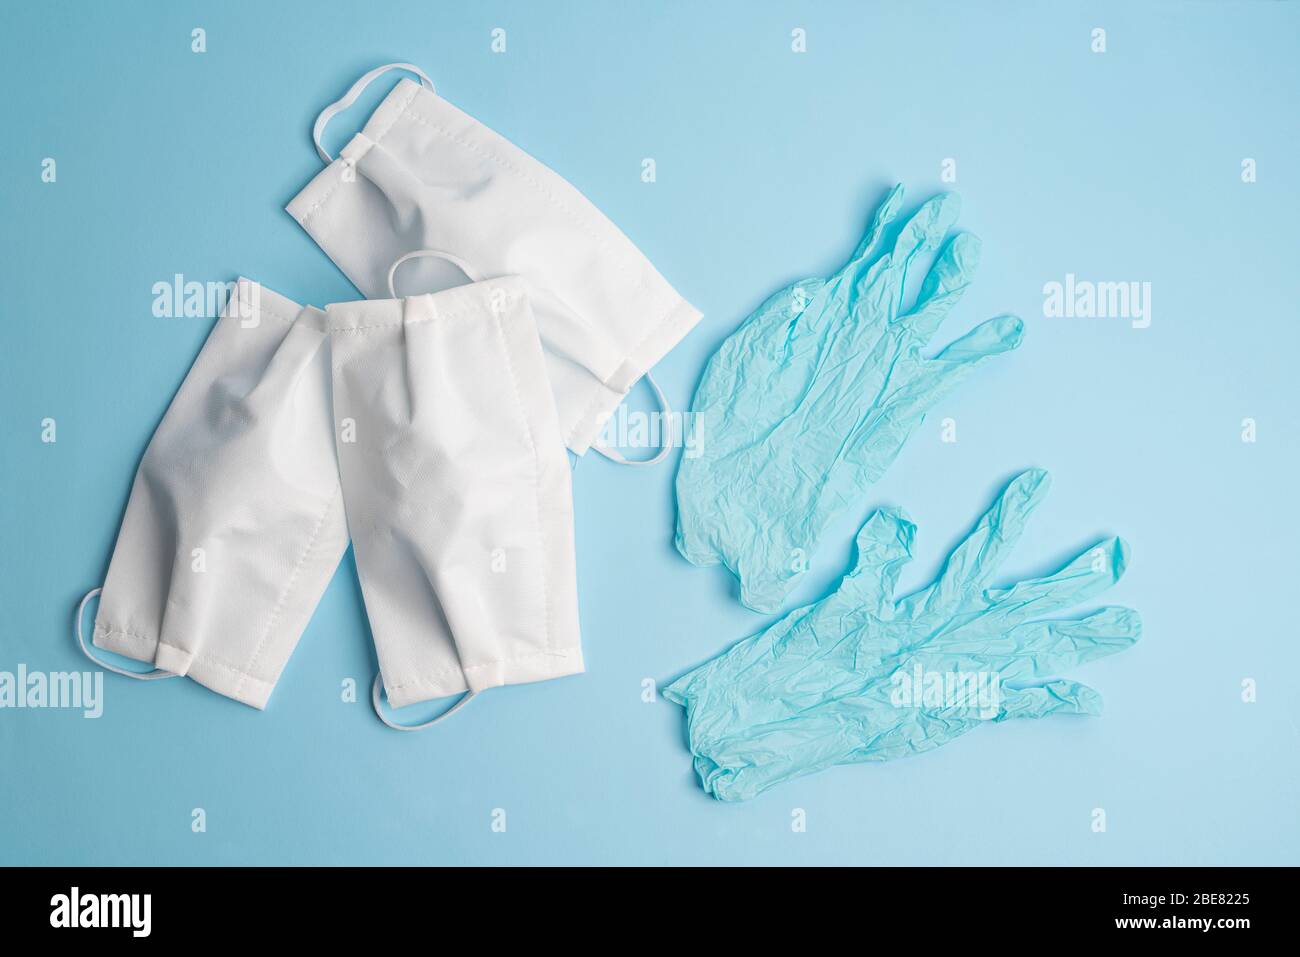 protective masks and disposable latex gloves on a colored surface Stock Photo